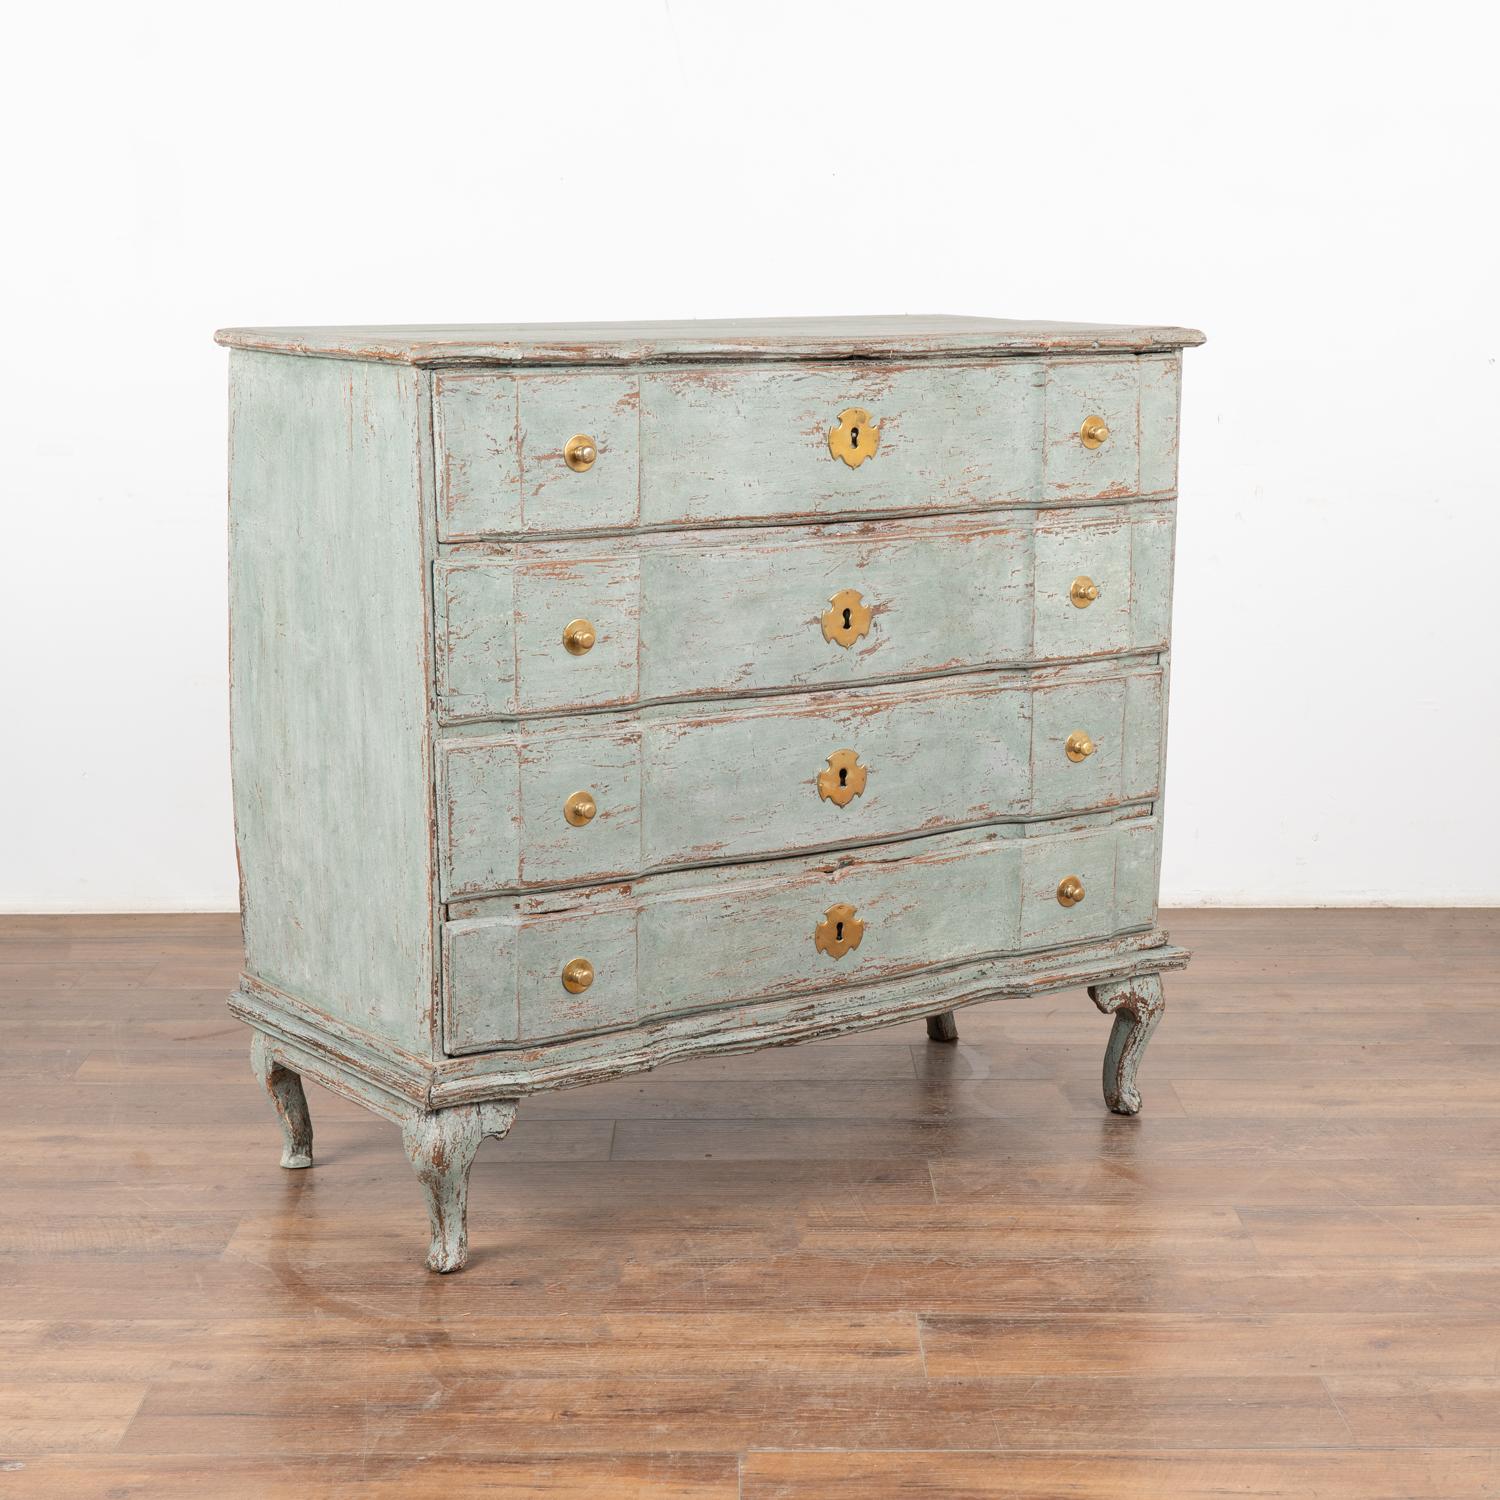 Large antique oak chest of four drawers with handsome brass hardware pulls all resting on cabriolet feet.
It has been given an exceptional new professional pale blue/seafoam layered painted finish and has been lightly distressed, bringing out the